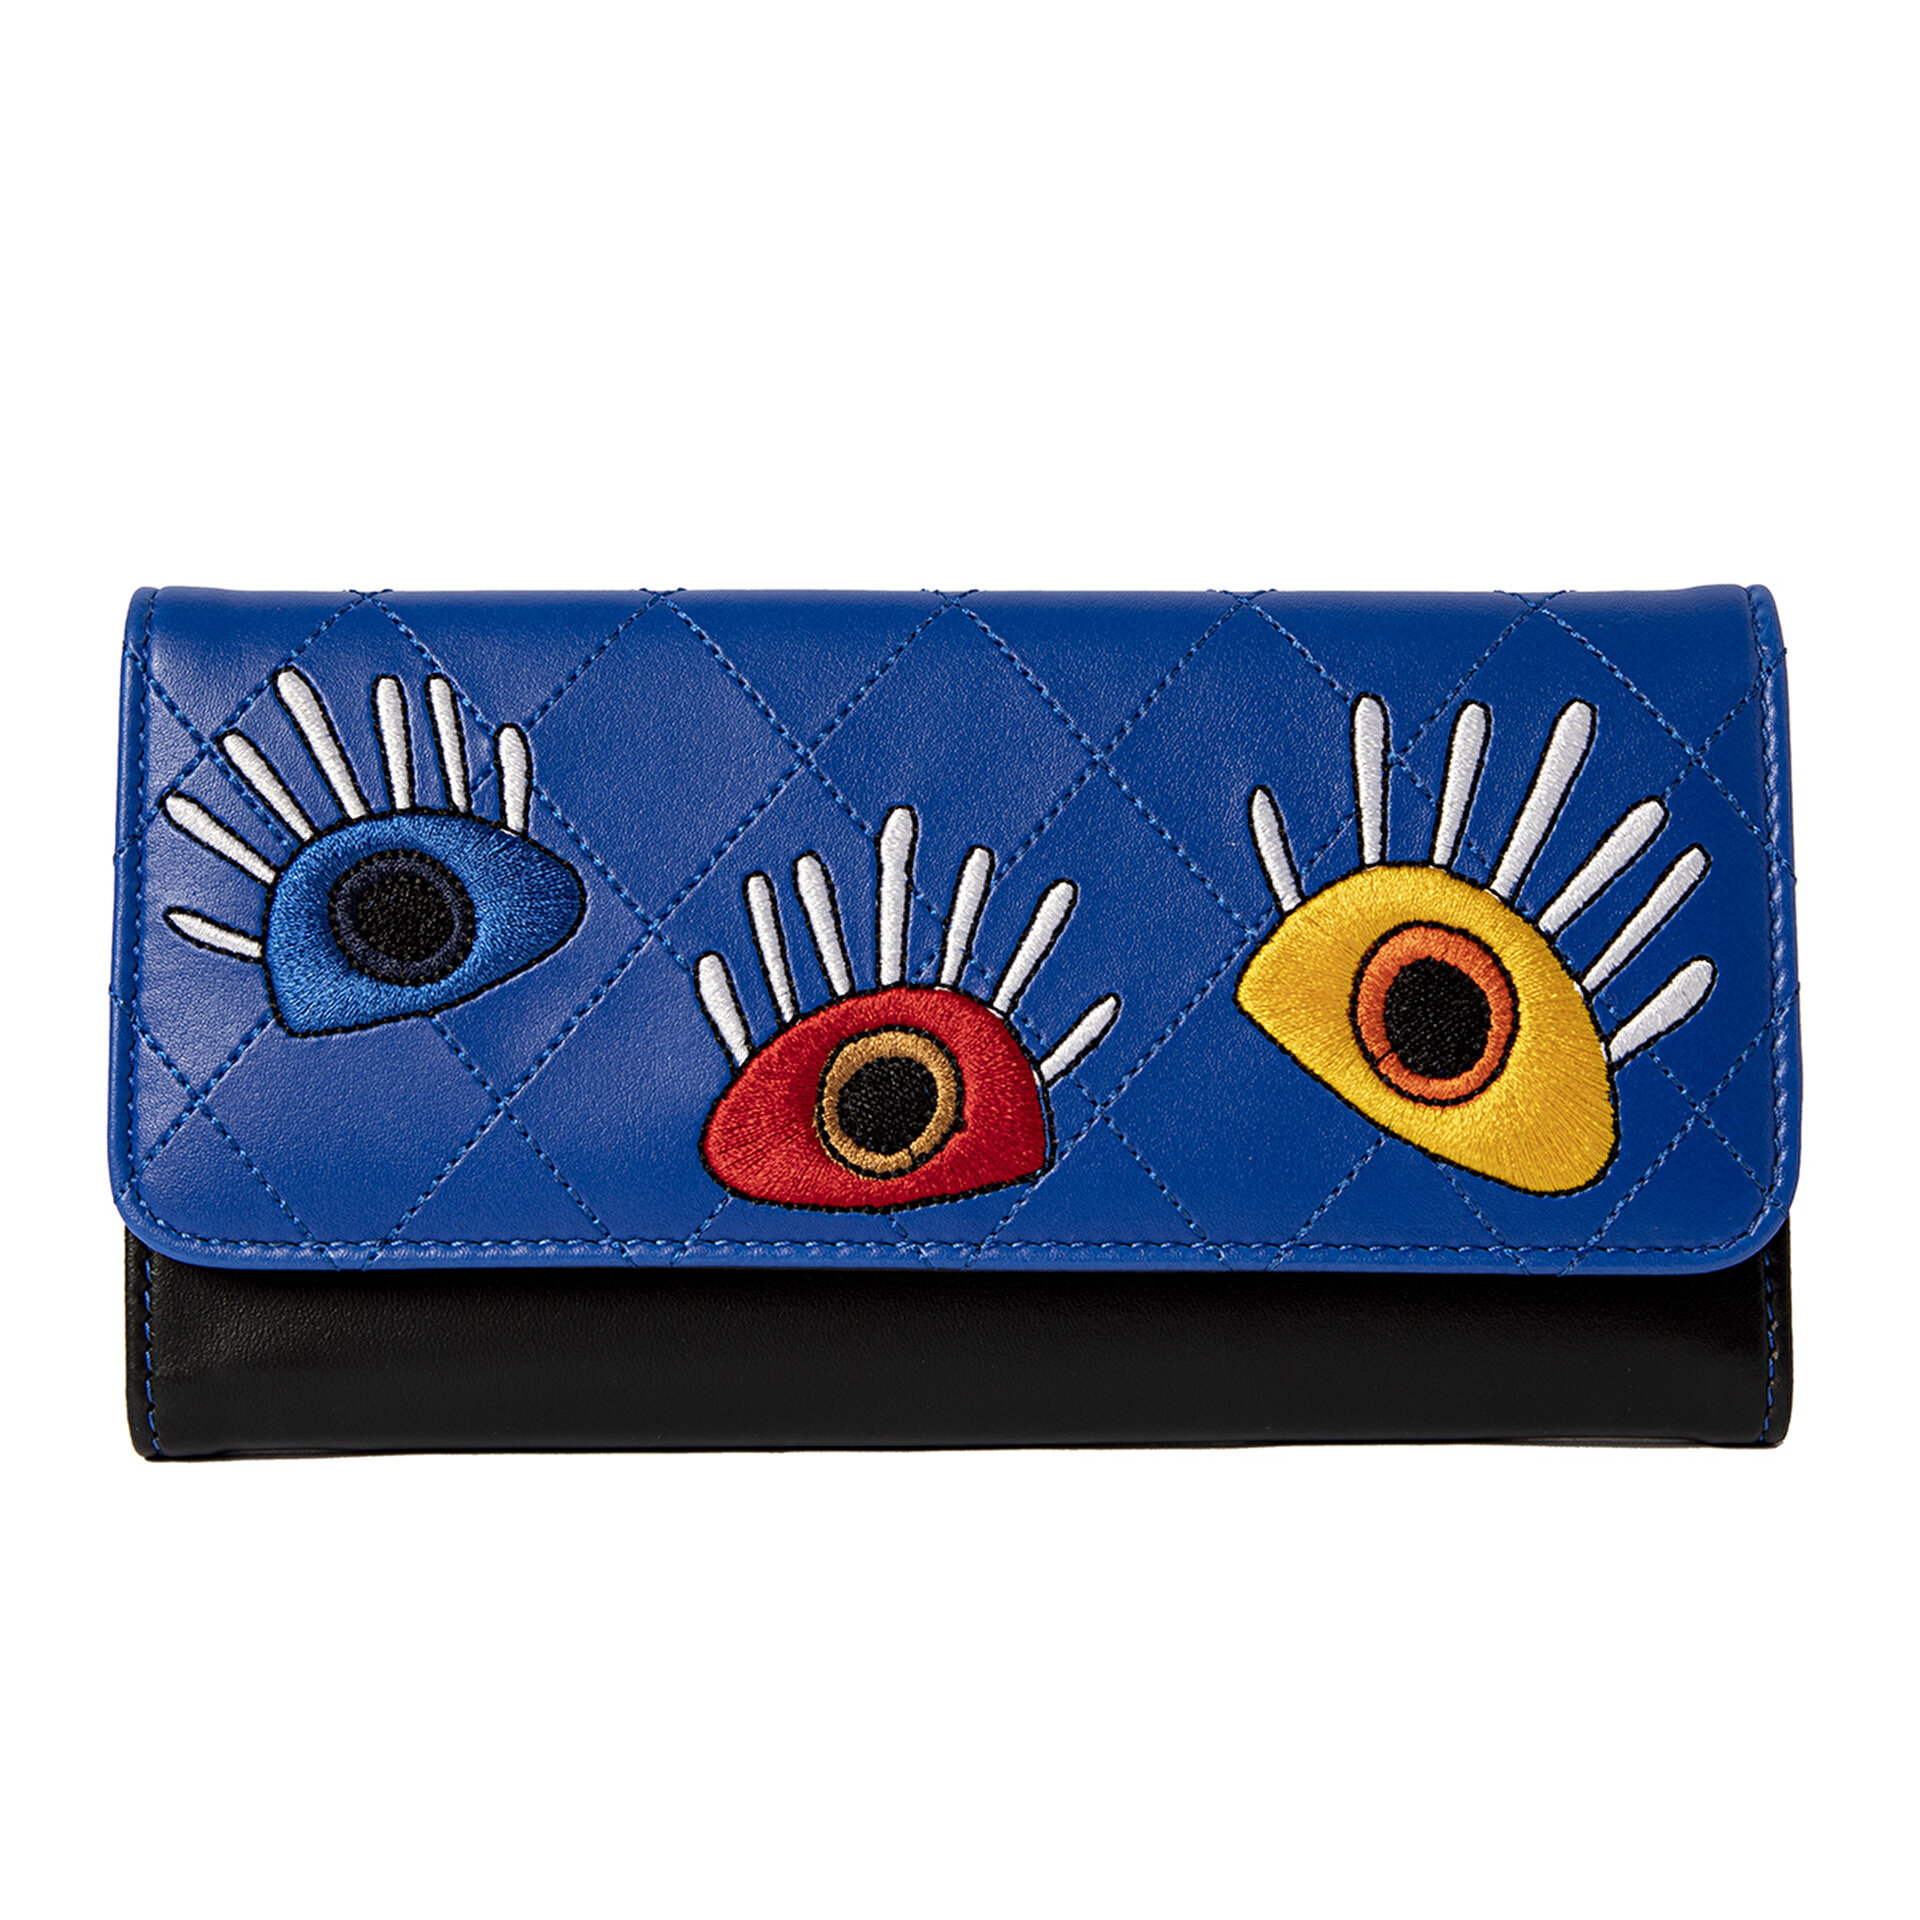 Biggdesign My Eyes On You Women's Wallets, Card Holder Wallet, Clutch Purse, Credit Card Holder, Large Capacity Womens Wallets Carrying Cash, Credit Cards and Mobile Phone, Blue Color 